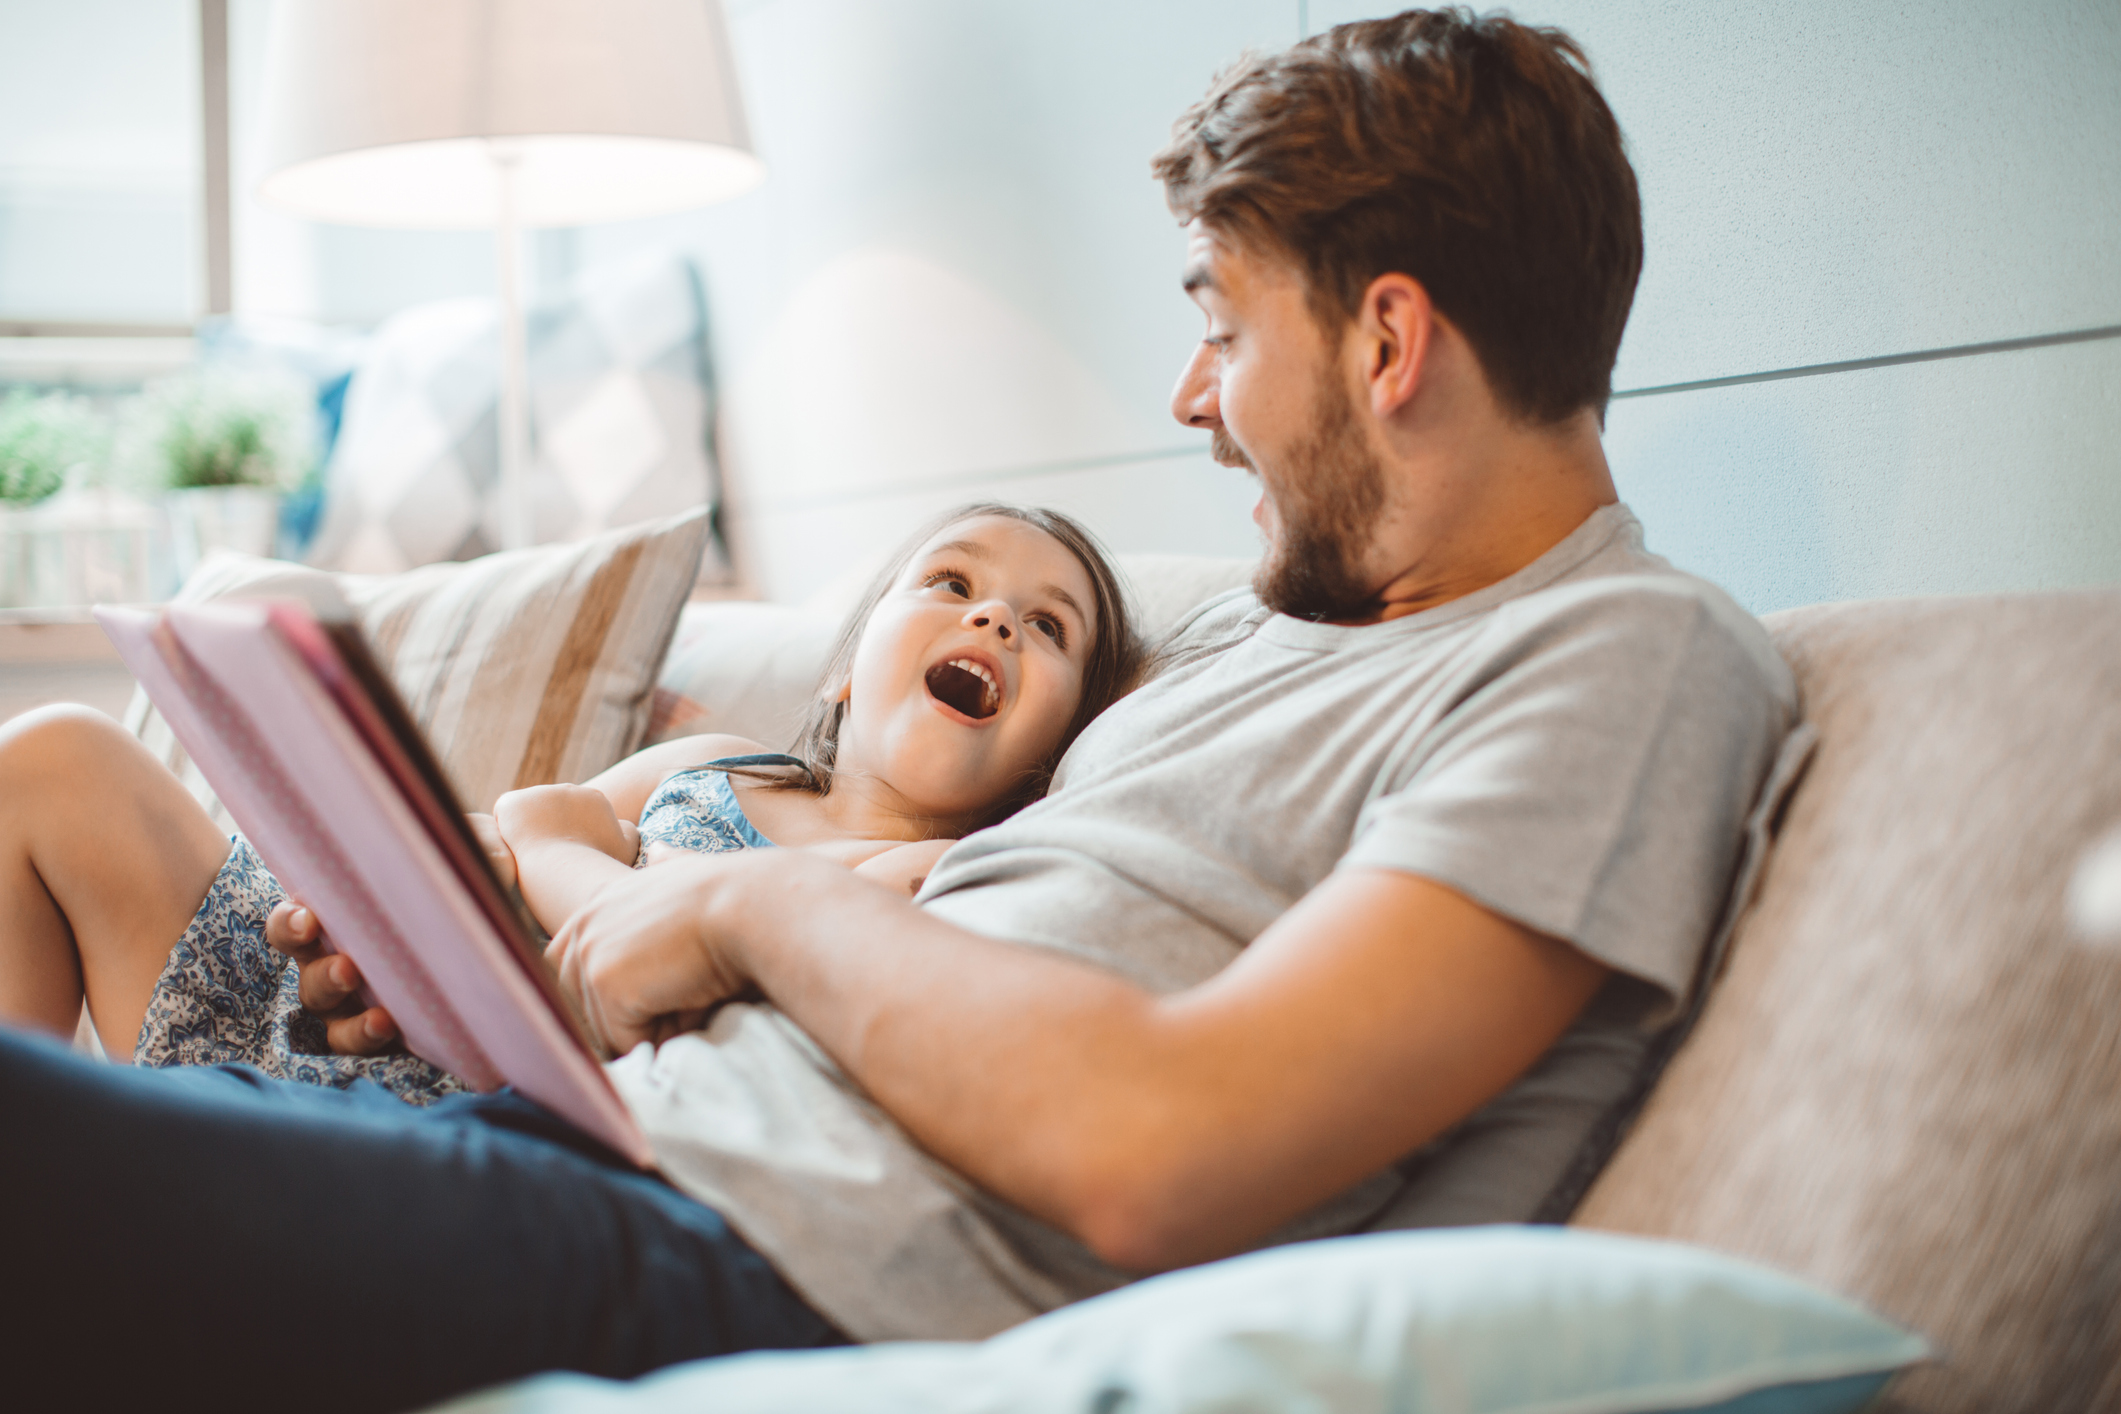 <p>"First, unless you are a single mom, don't act like a single mom! Dads need to help with the homework BS too! When we are gearing up for a homework fight, sometimes it's best if I tag out and he takes over. Some fresh parenting energy can help." – Olivia T., Rhode Island</p>